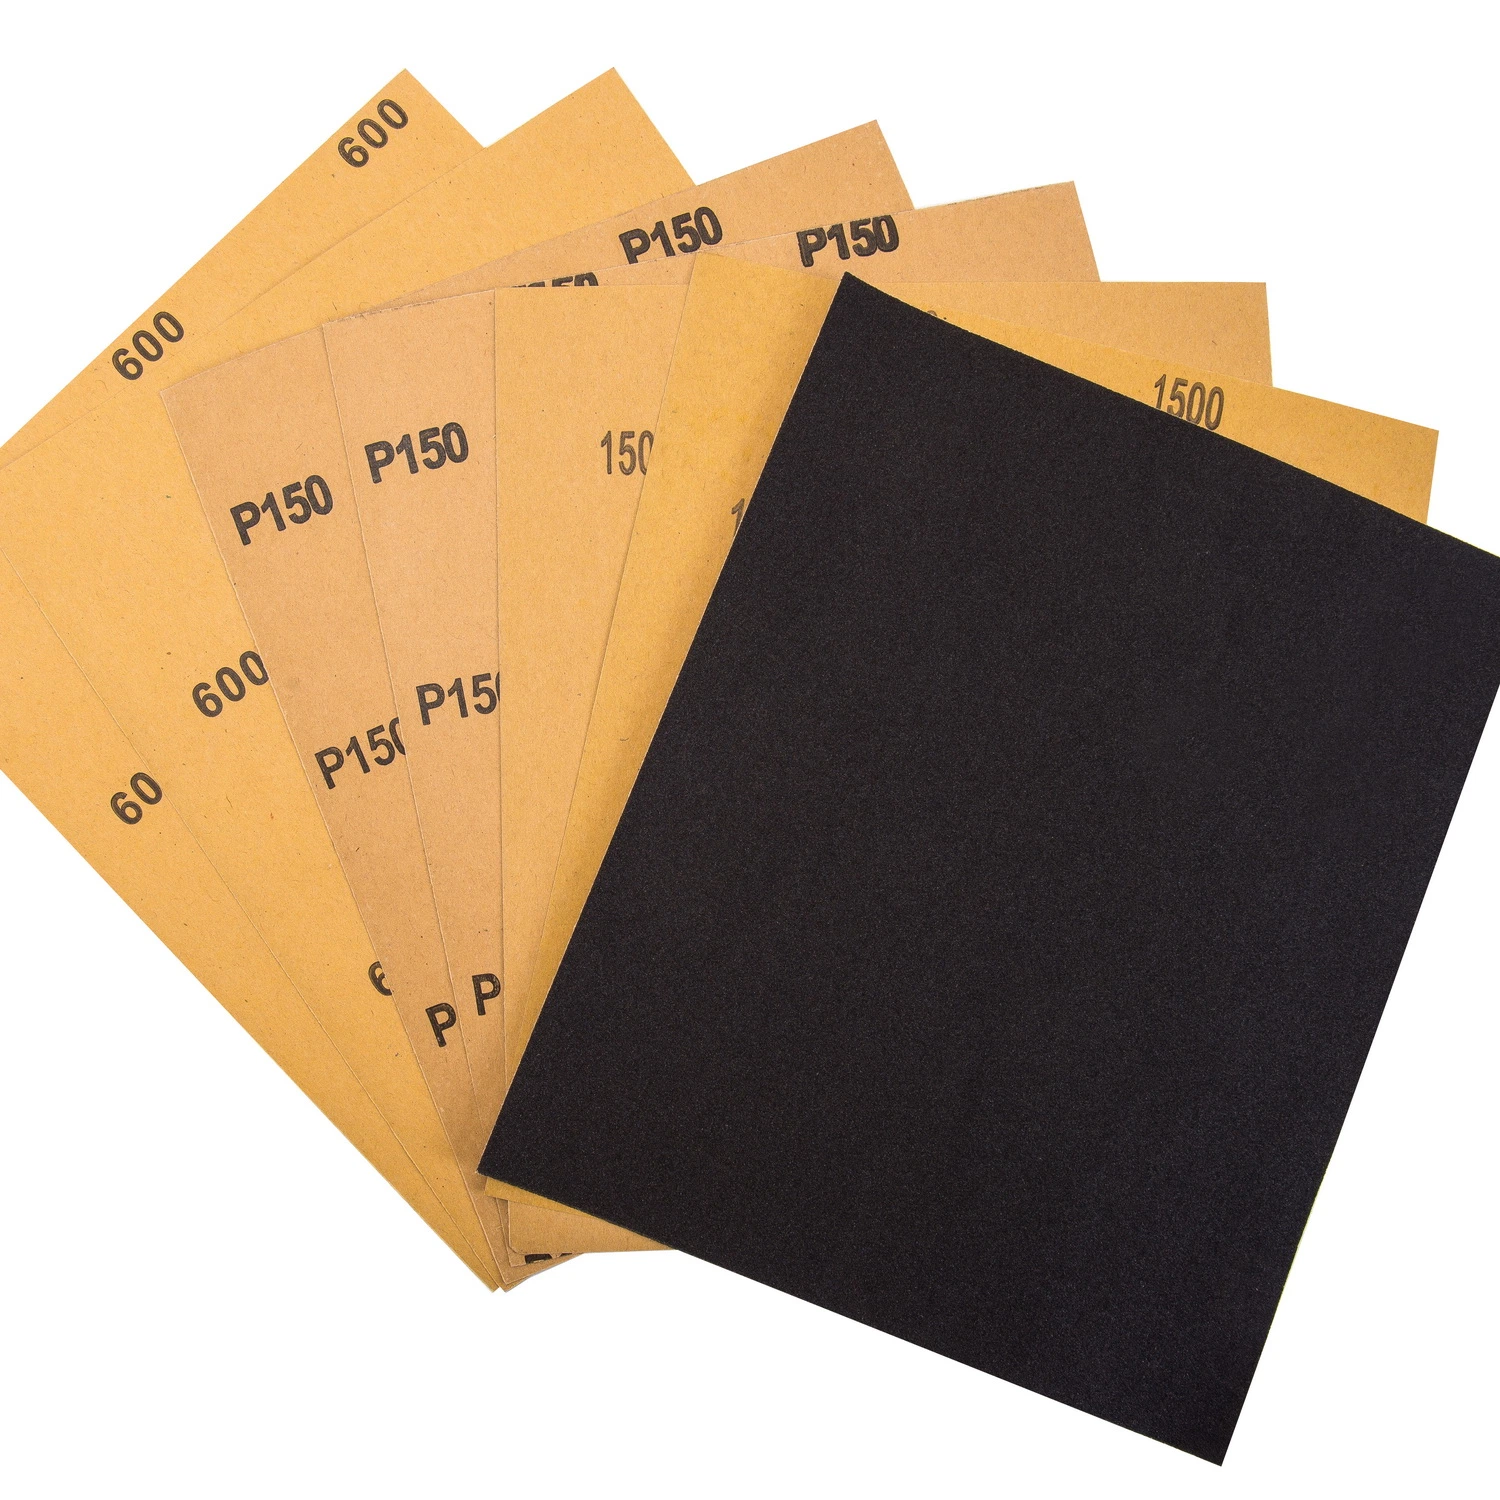 9" X11" Waterproof Abrasive Paper Sheet Abrasive Tools for Grinding and Polishing Metal and Steel.